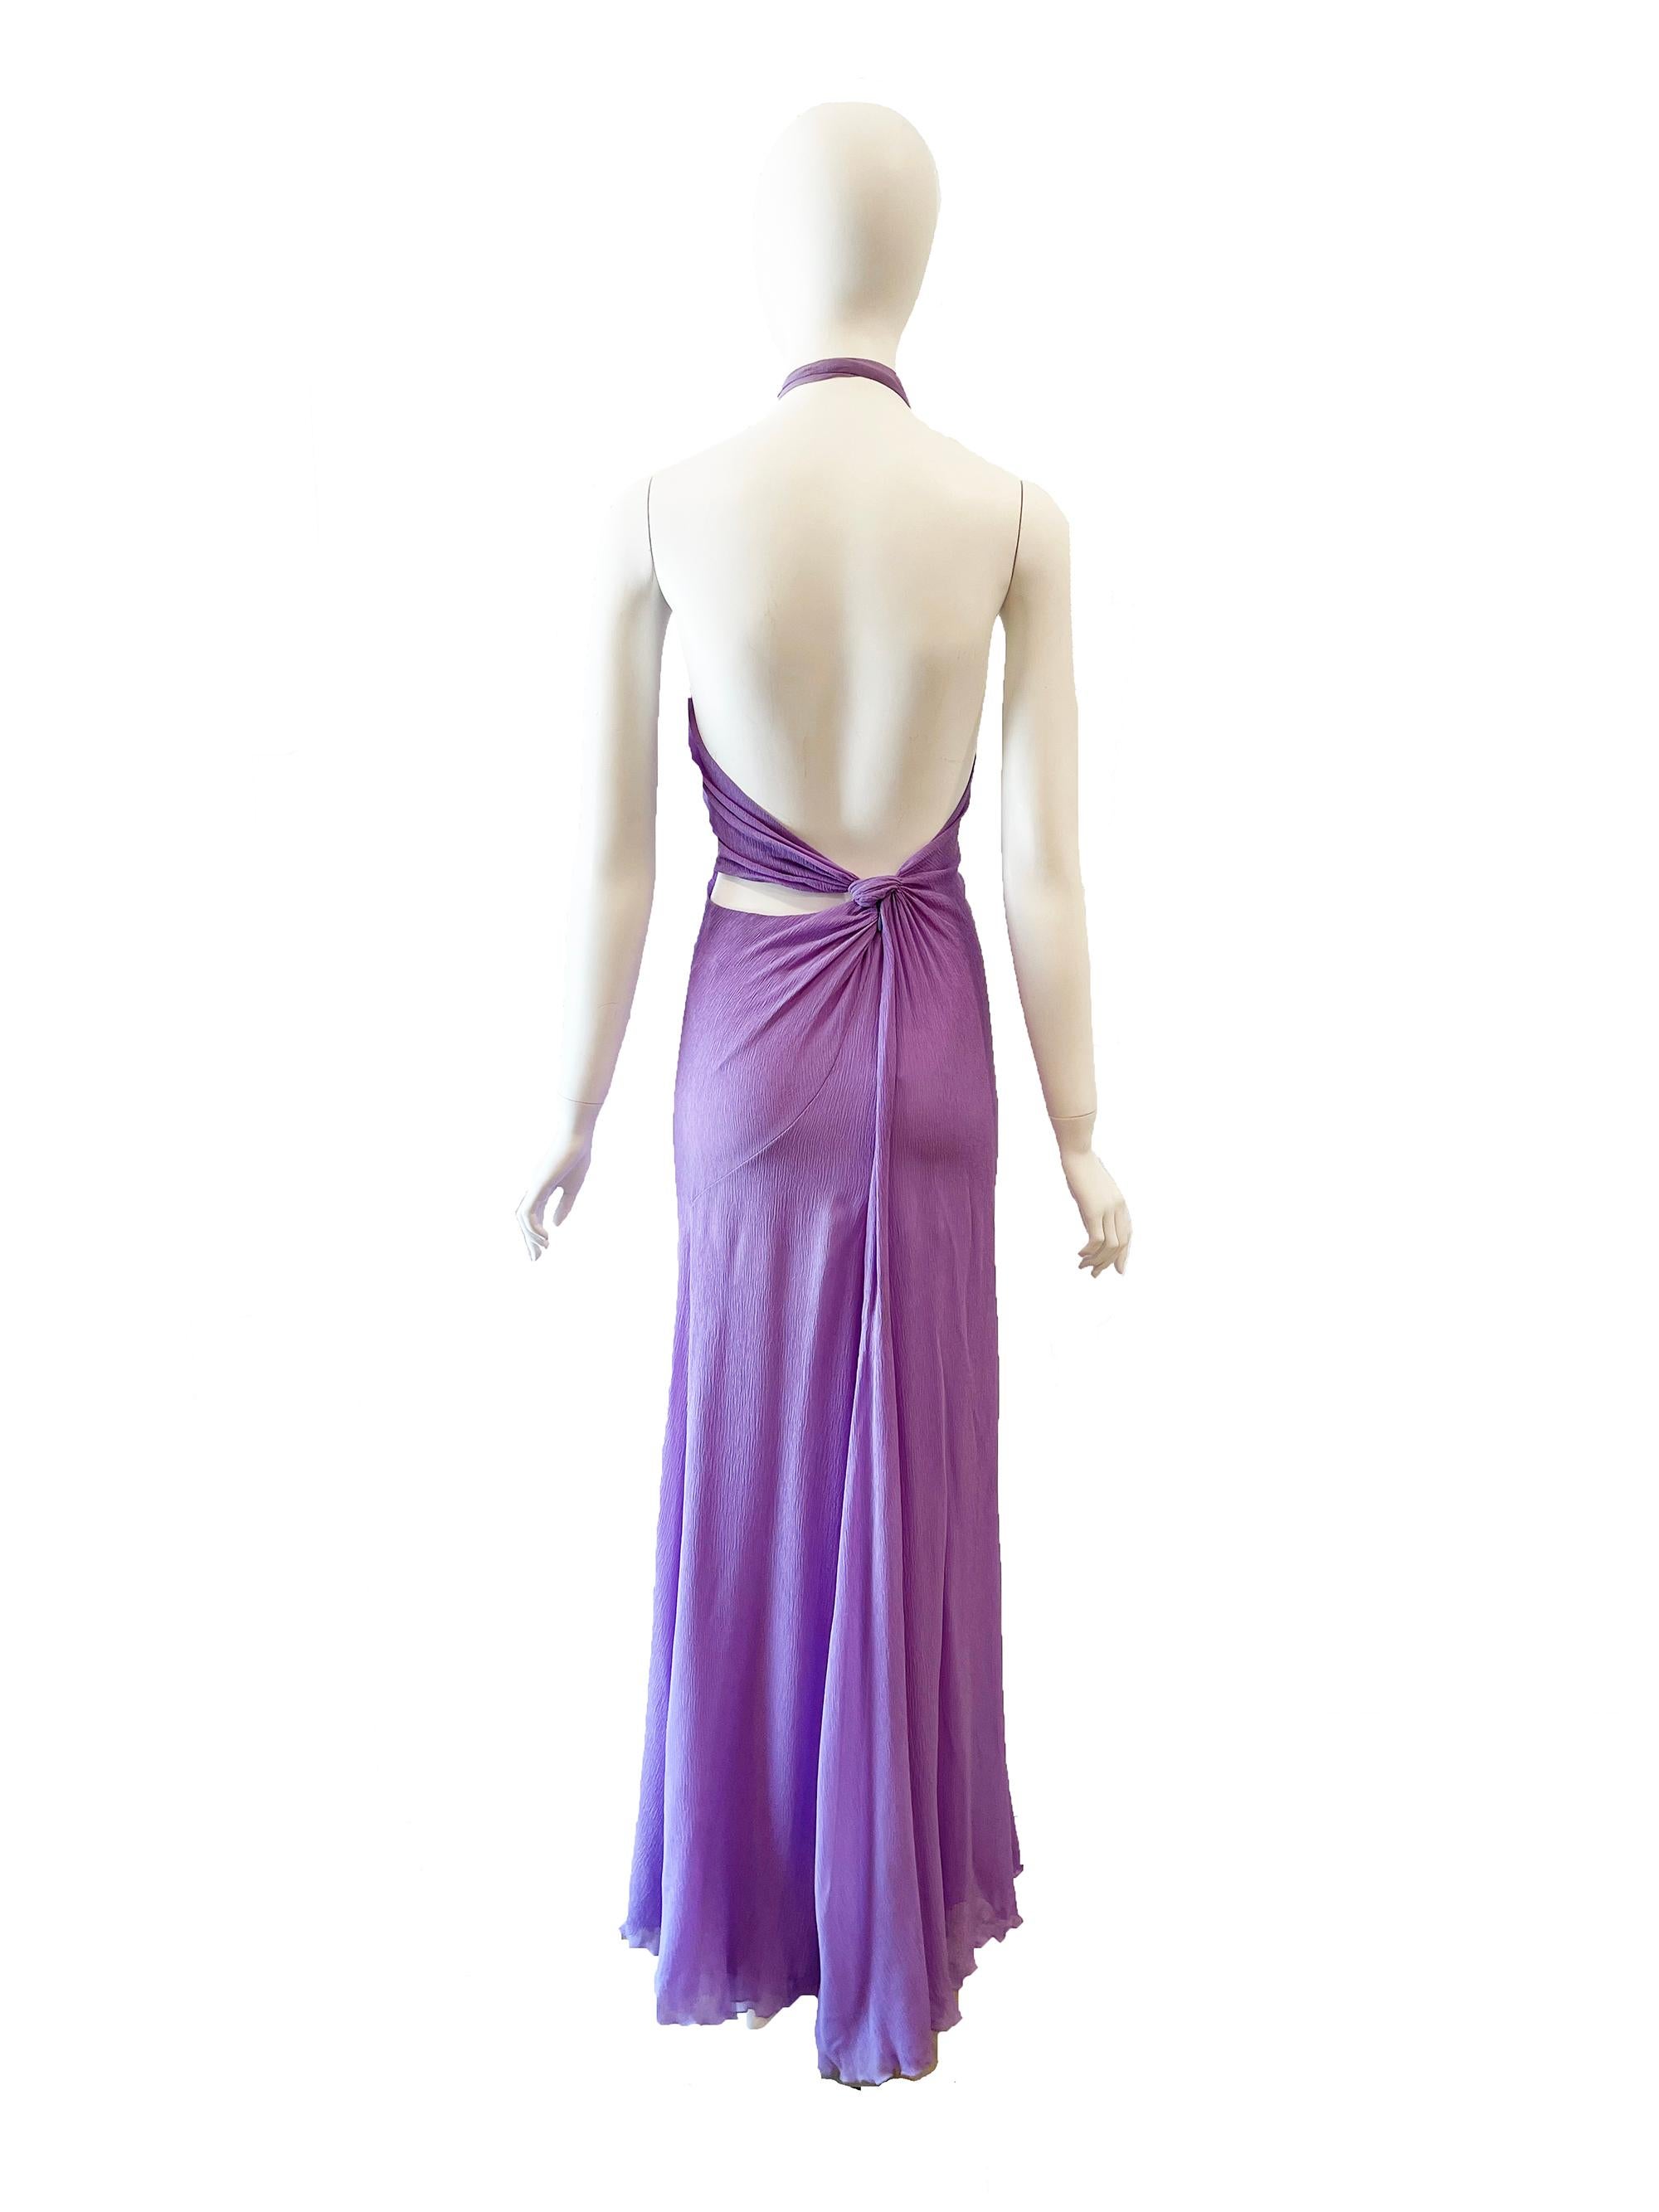 1990s purple Gianni Versace halter open back evening gown

Condition: Very good

20